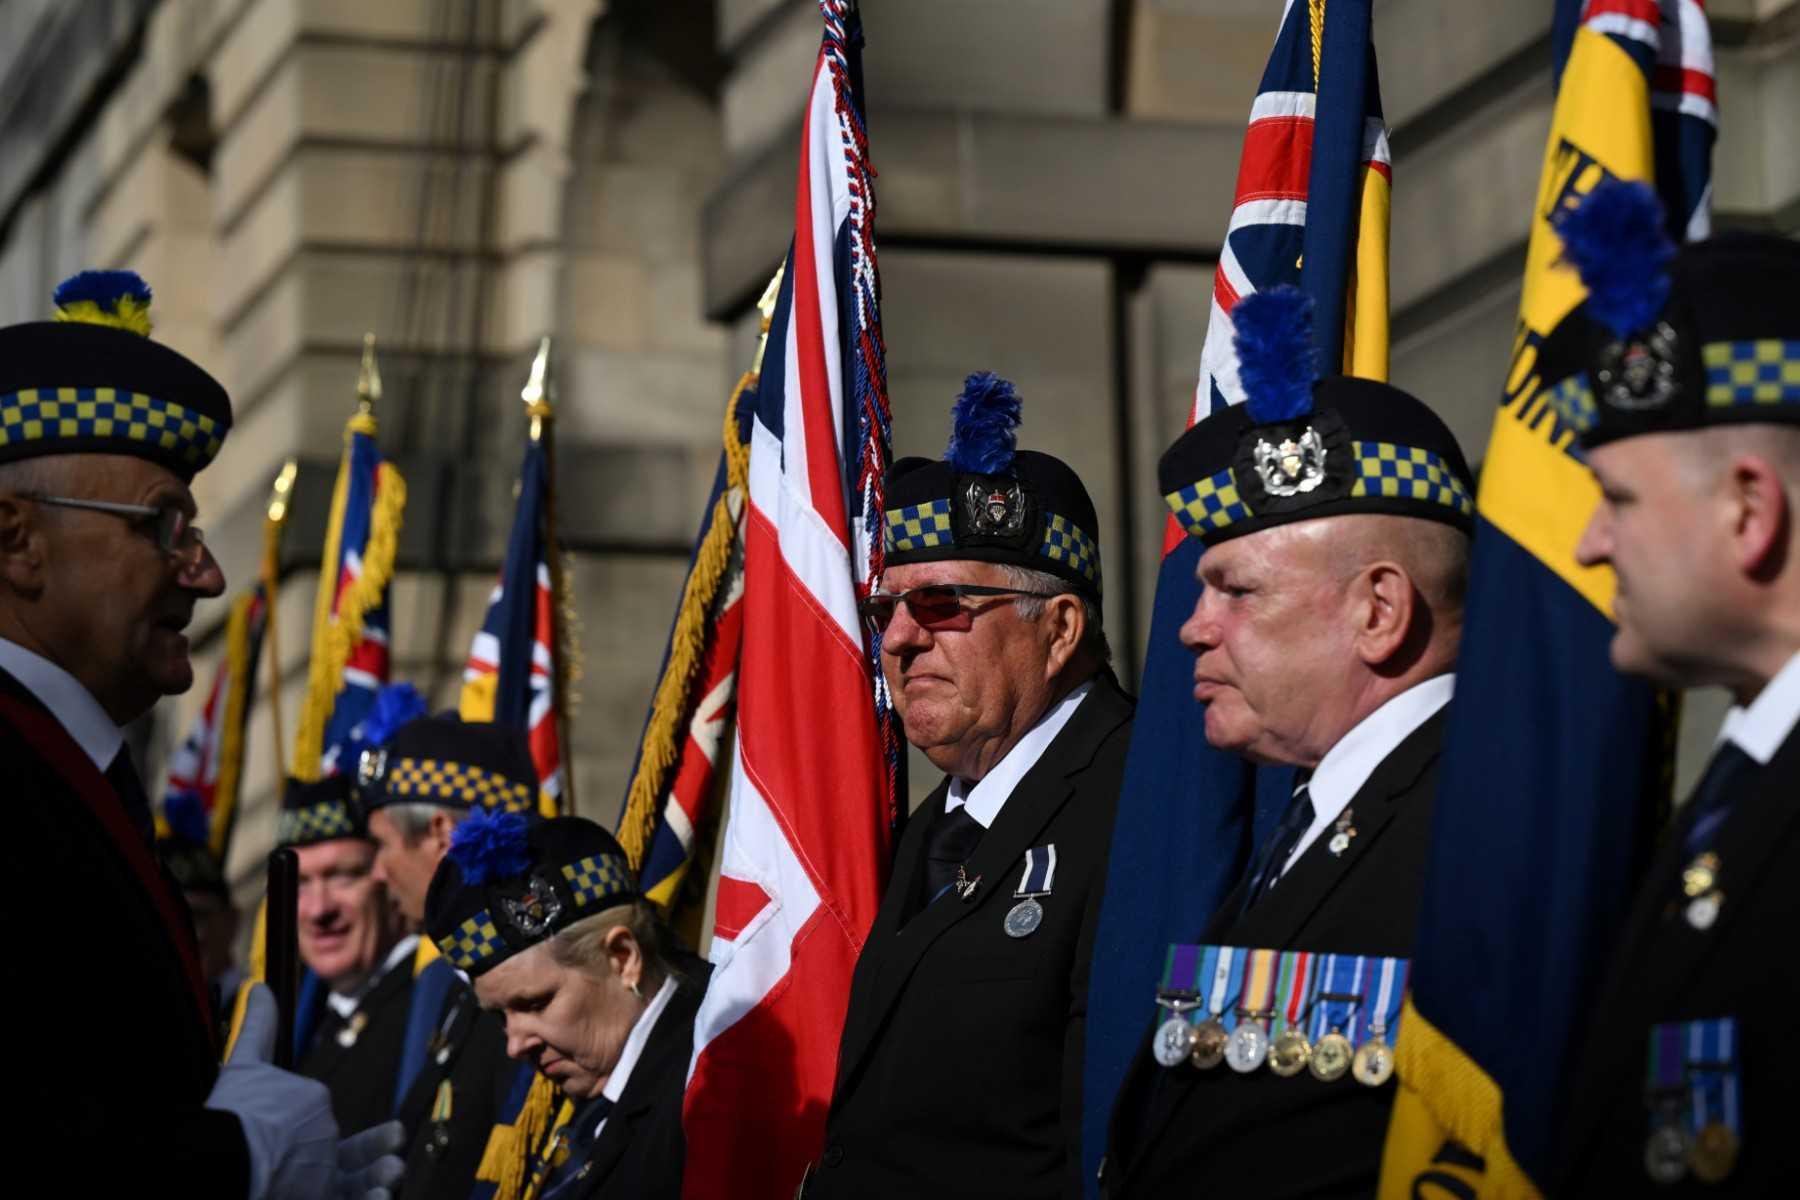 Veterans of the Royal British Legion of Scotland stand guard outside of the St Giles' Cathedral in Edinburgh on Sept 11. Photo: AFP 